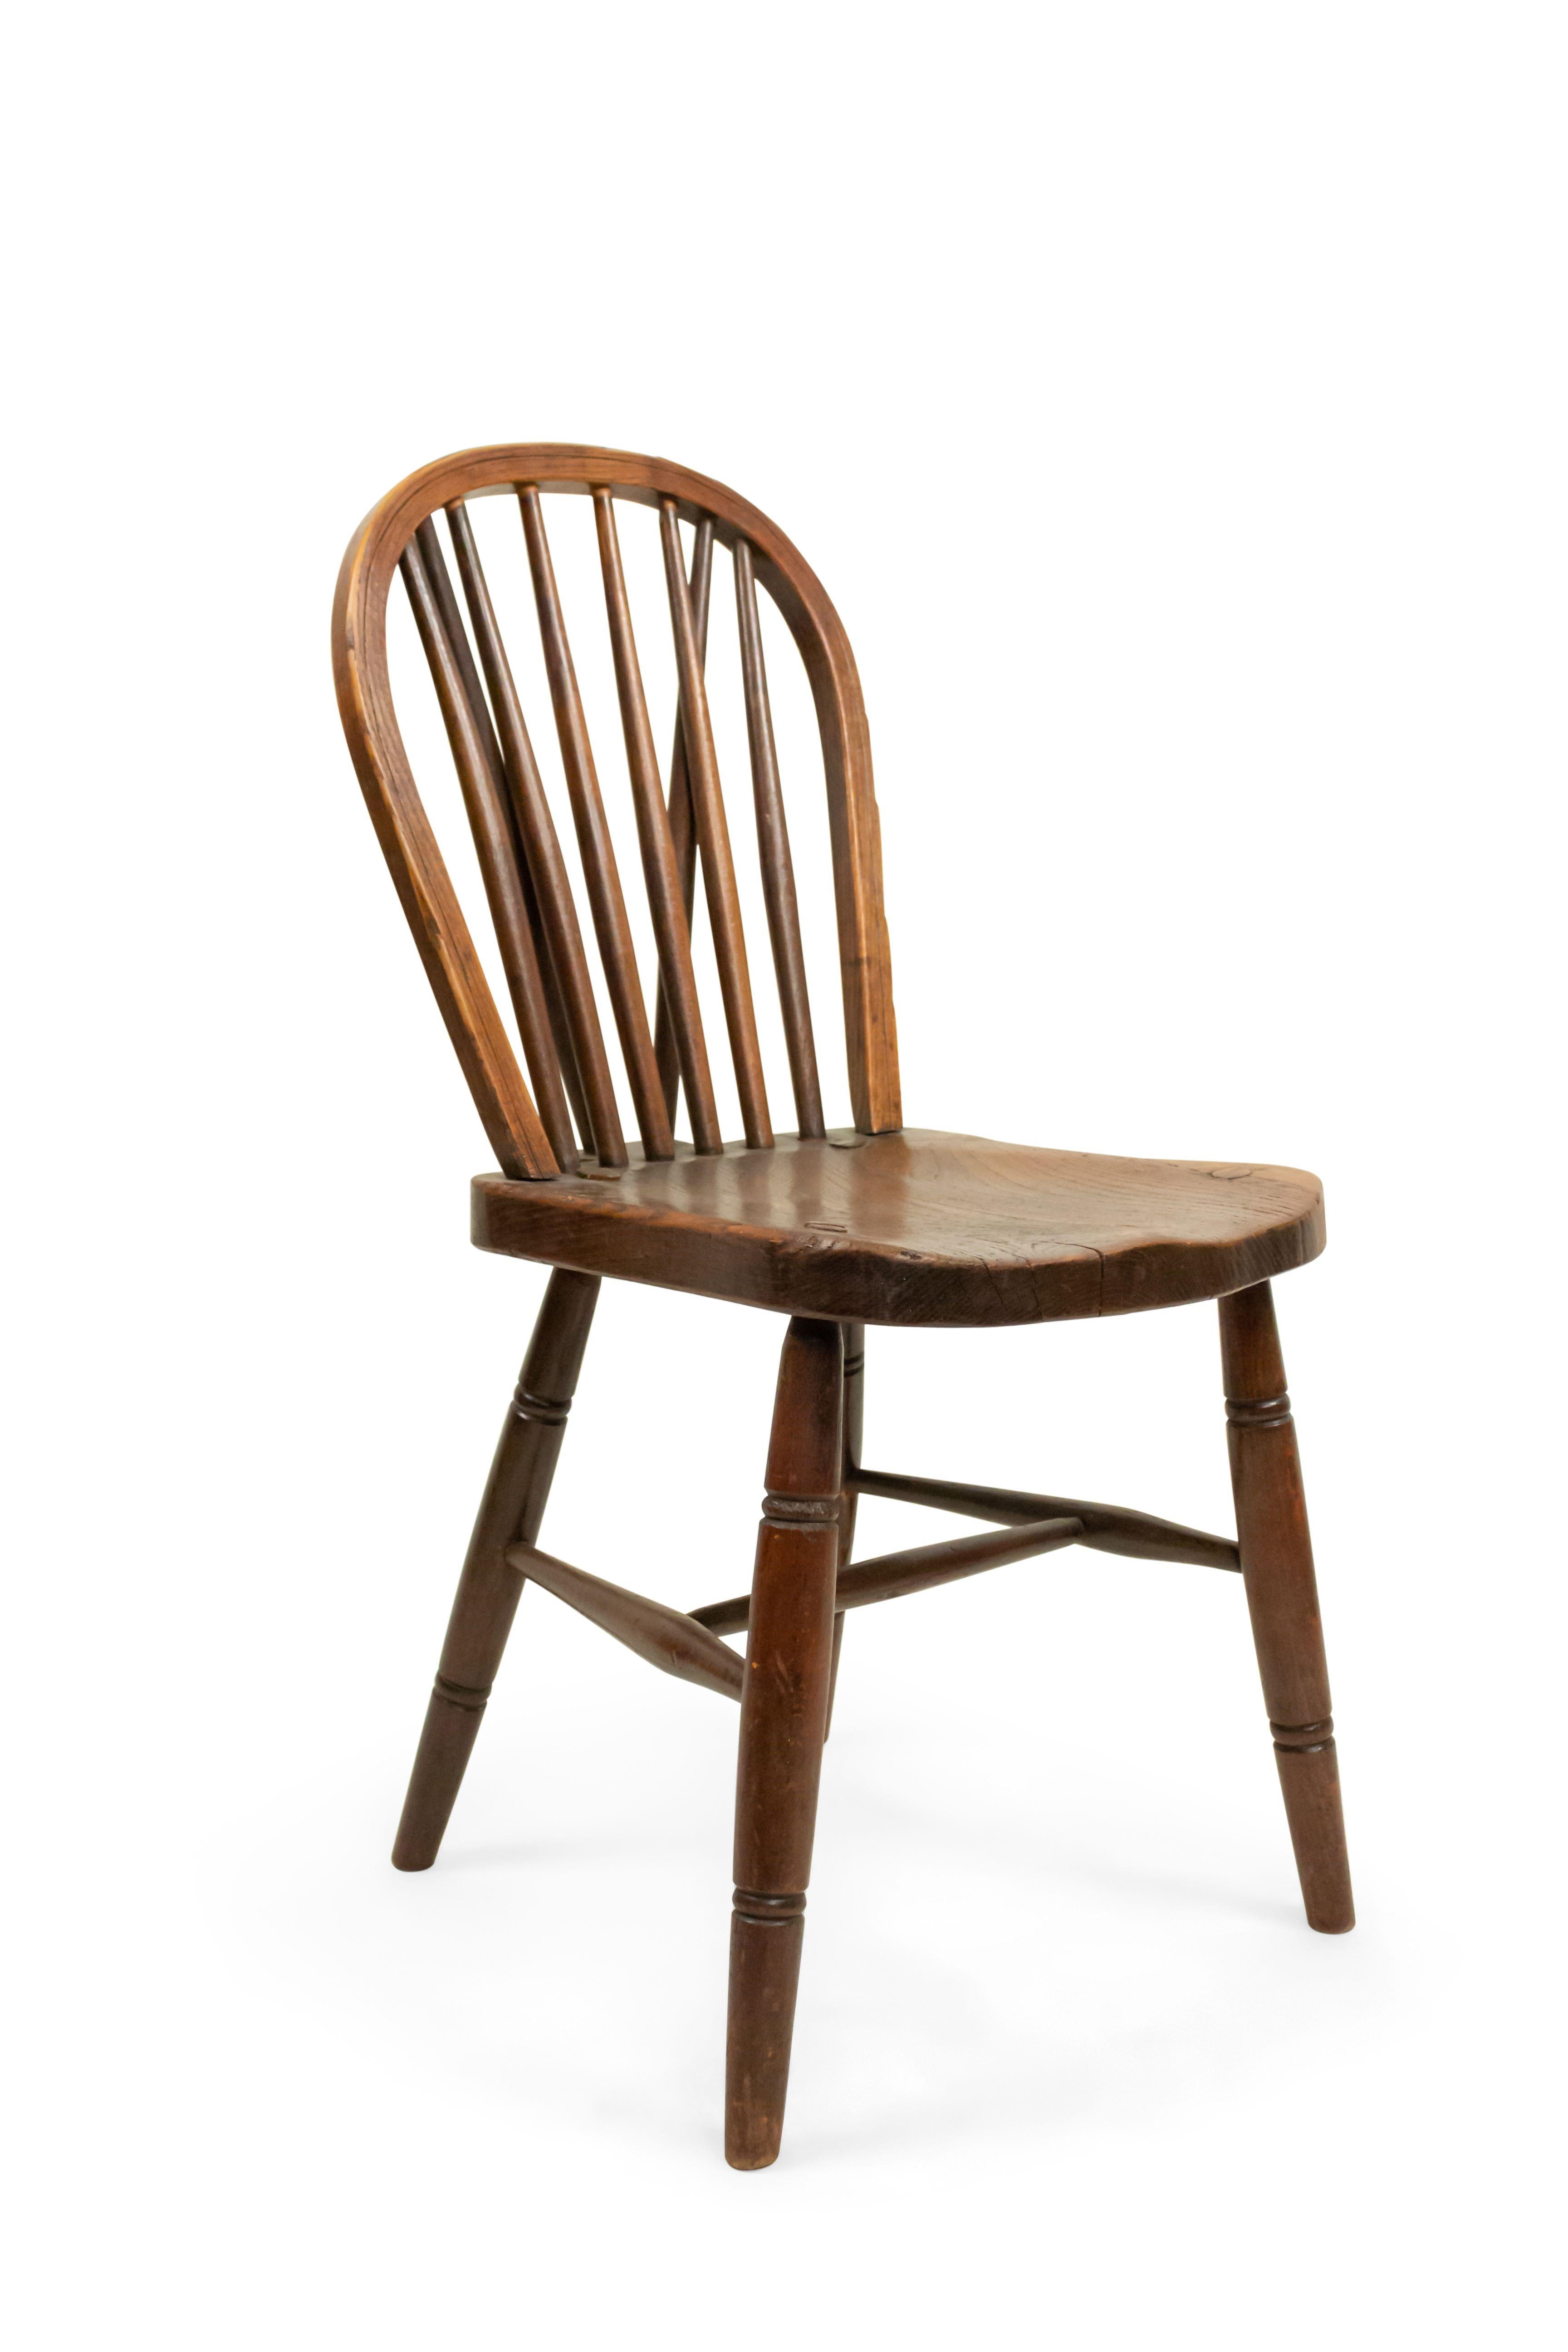 19th Century English Country Walnut Side Chair